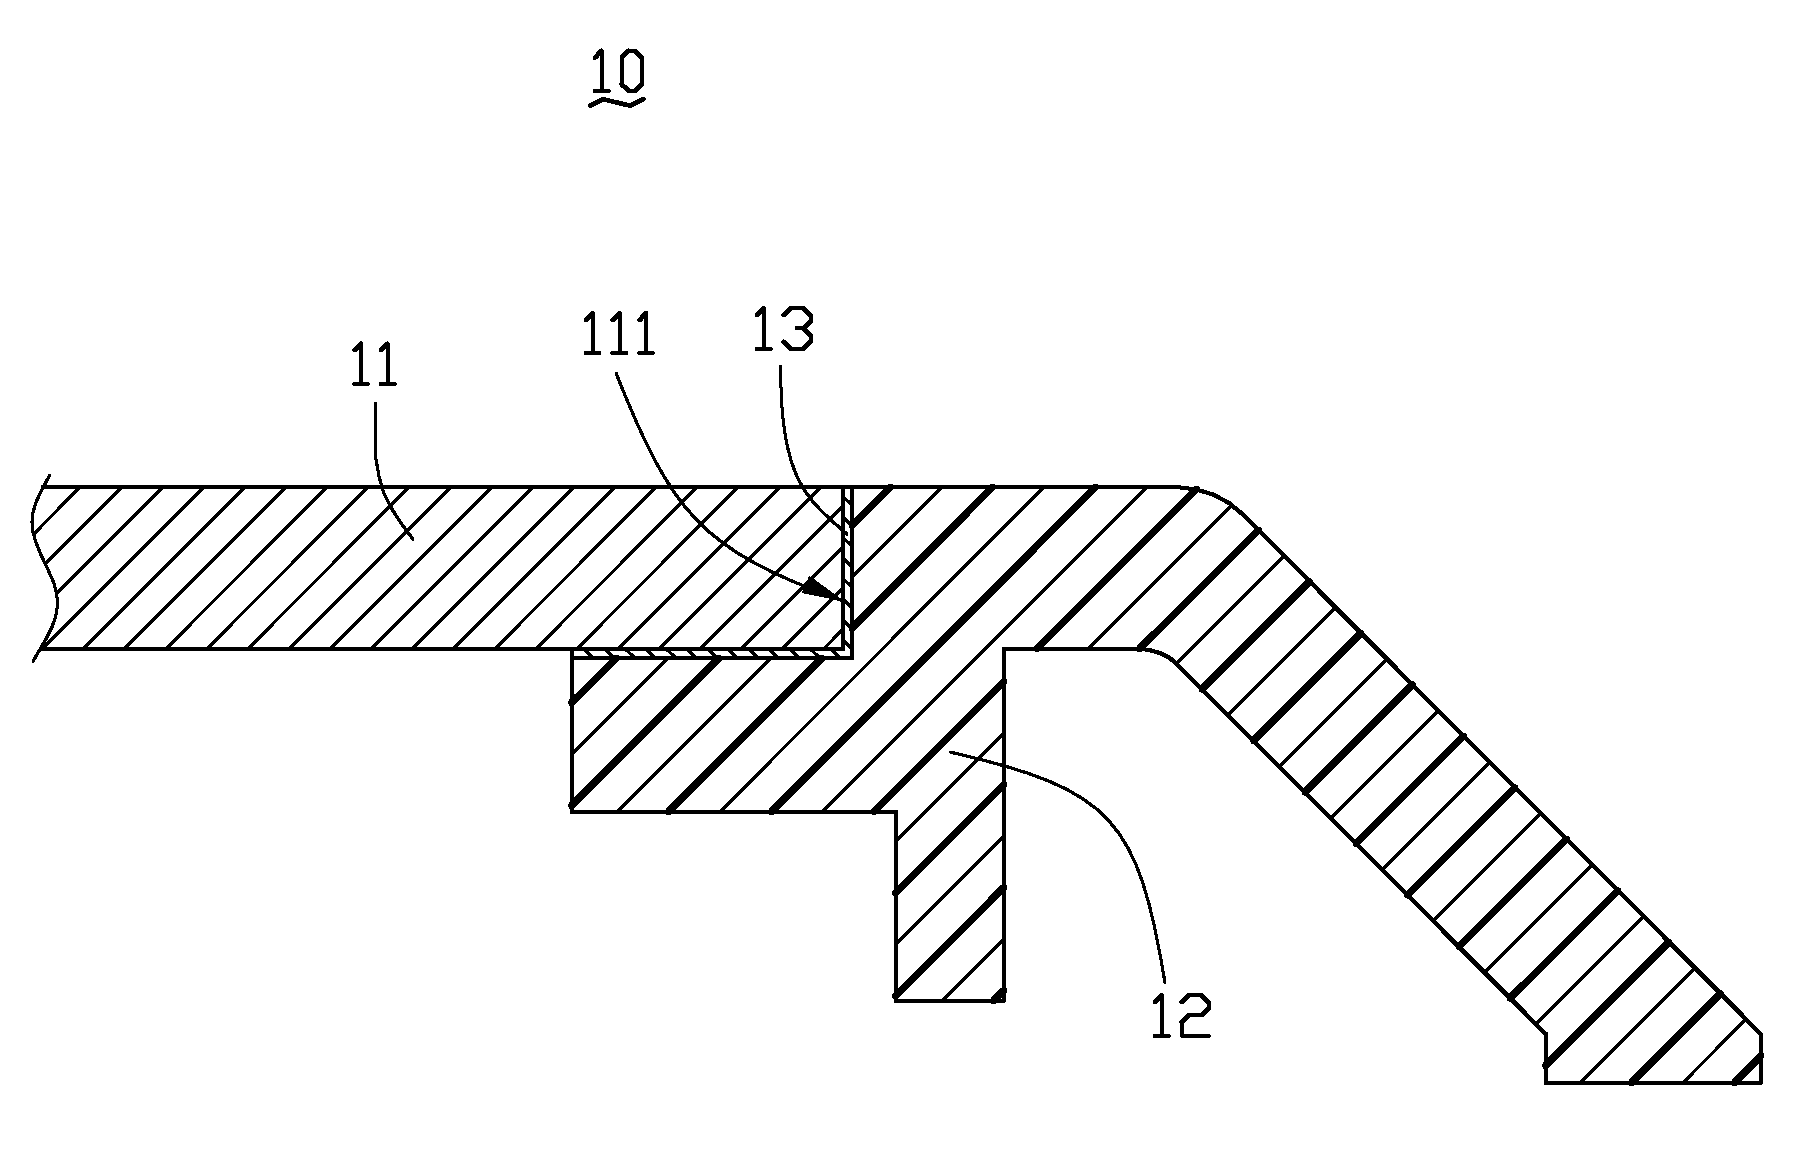 Insert-molded cover and method for manufacturing same